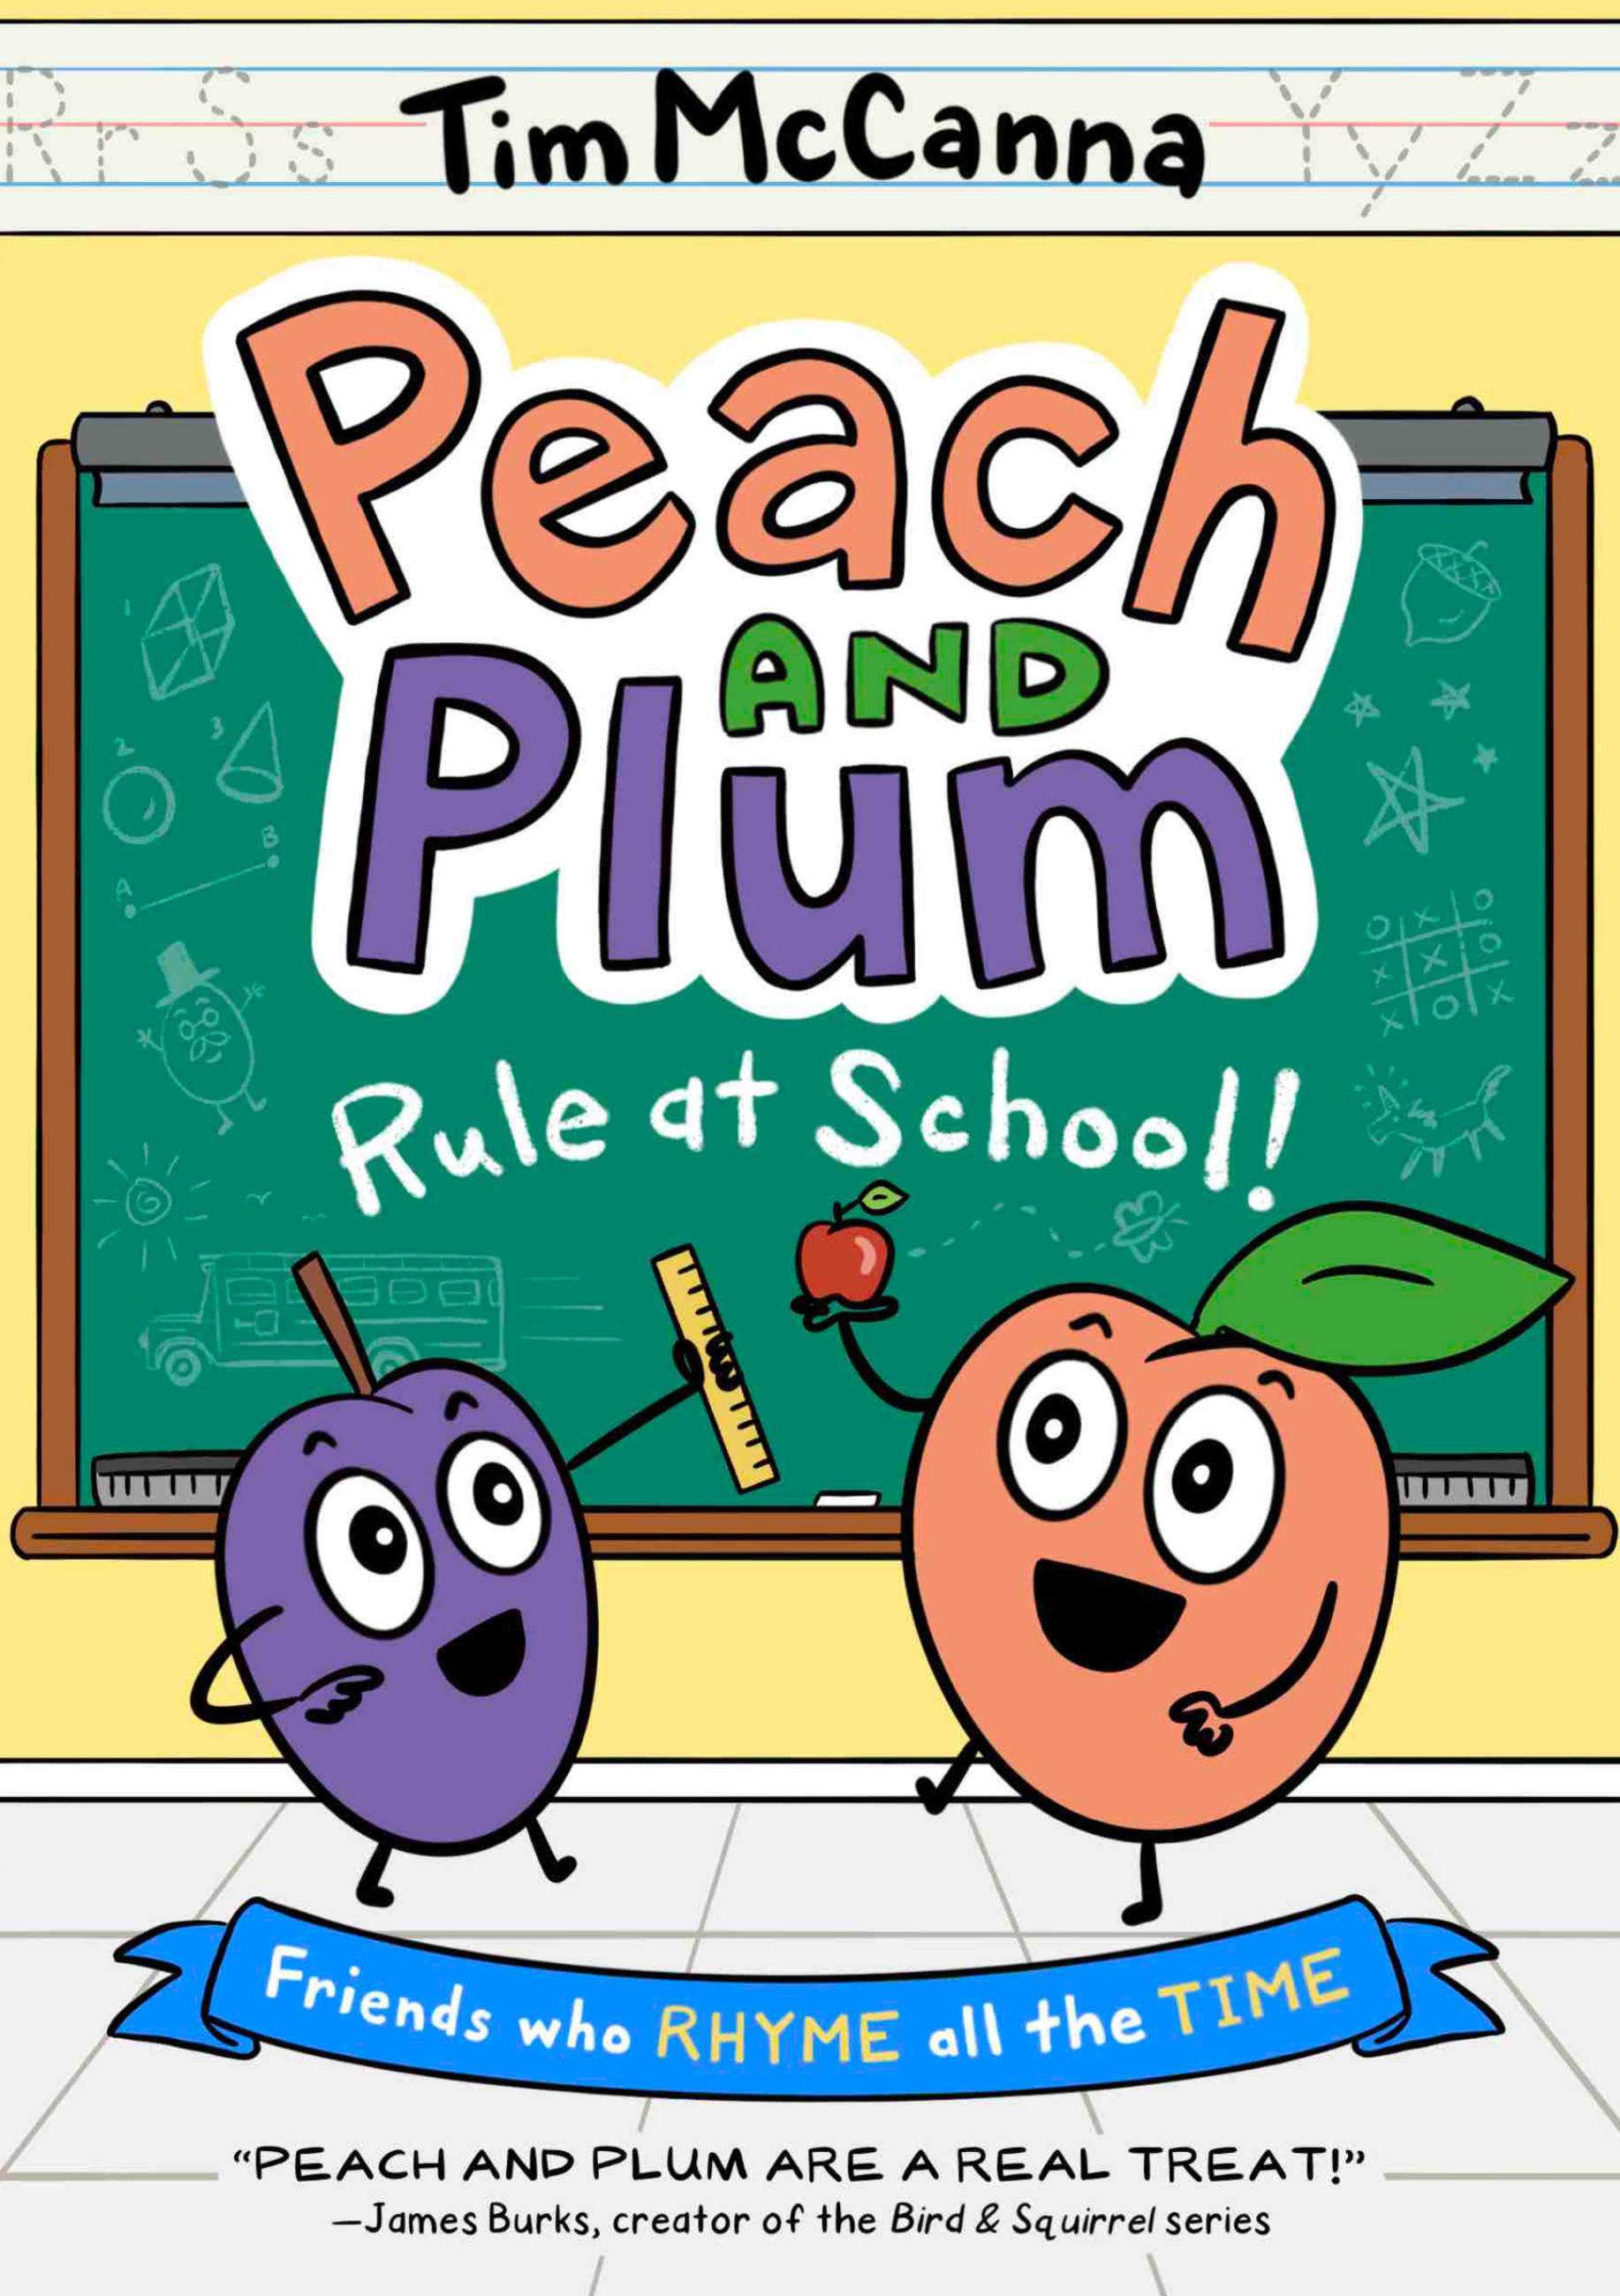 and　Rule　Tim　(A　Peach　McCanna　Book　Plum:　Graphic　Hachette　School!　at　by　Novel)　Group